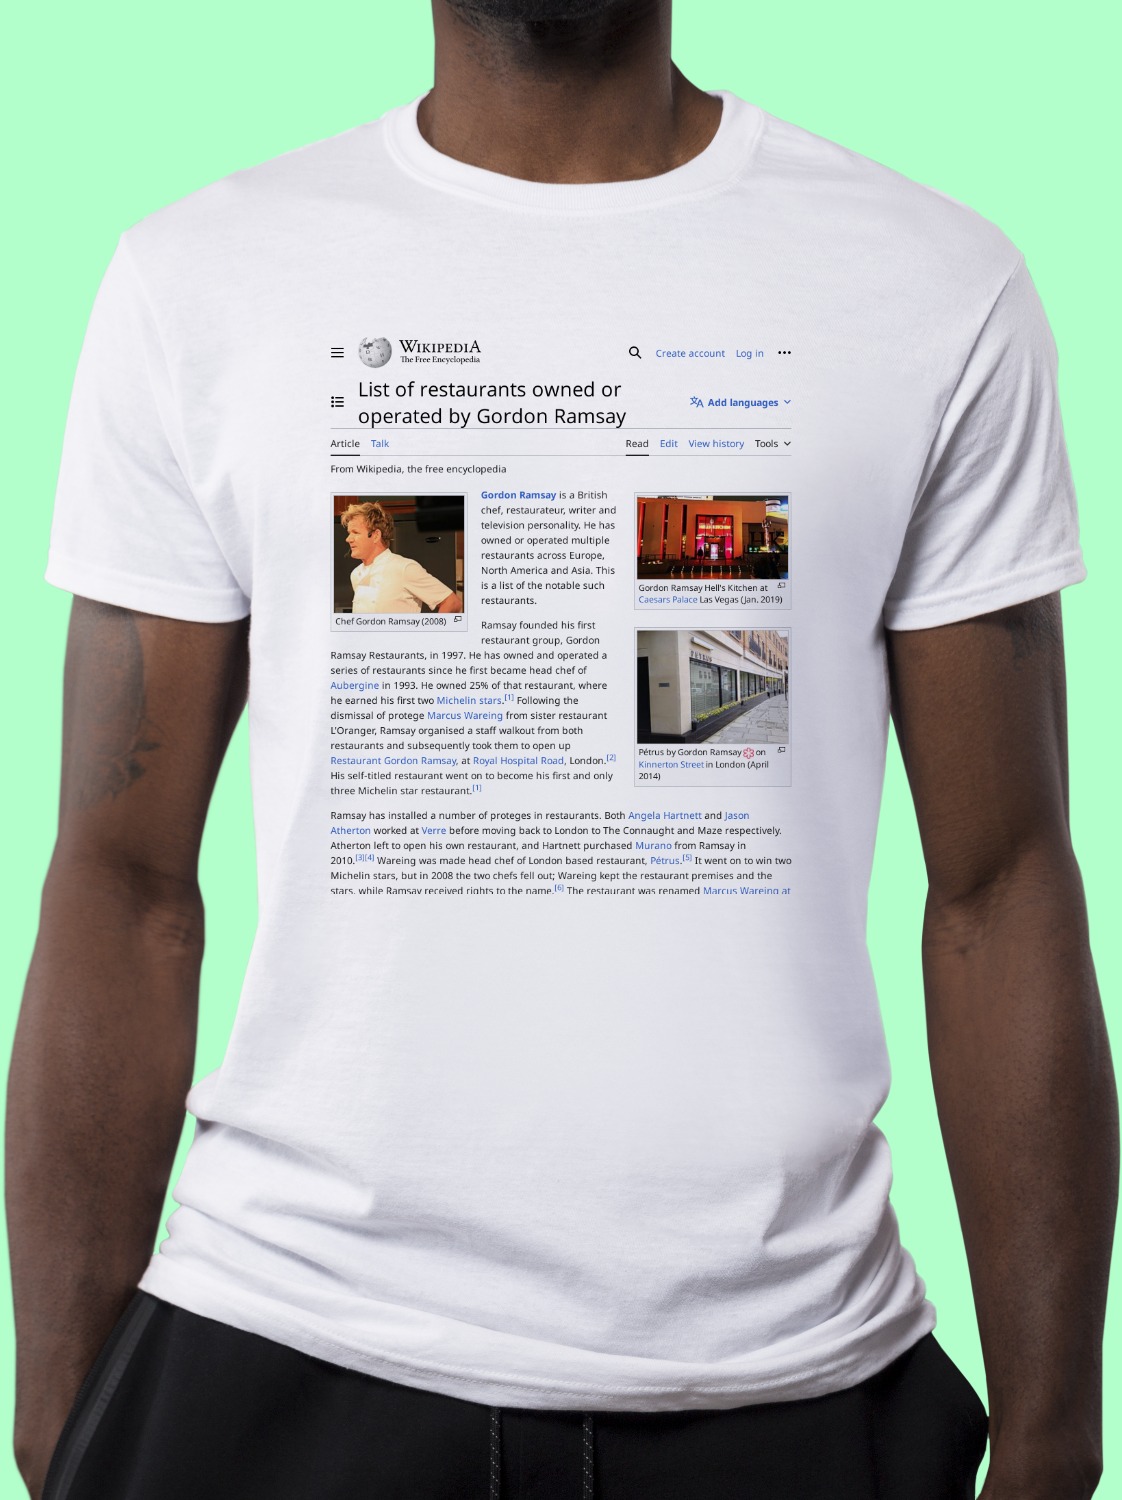 List_of_restaurants_owned_or_operated_by_Gordon_Ramsay Wikipedia Shirt